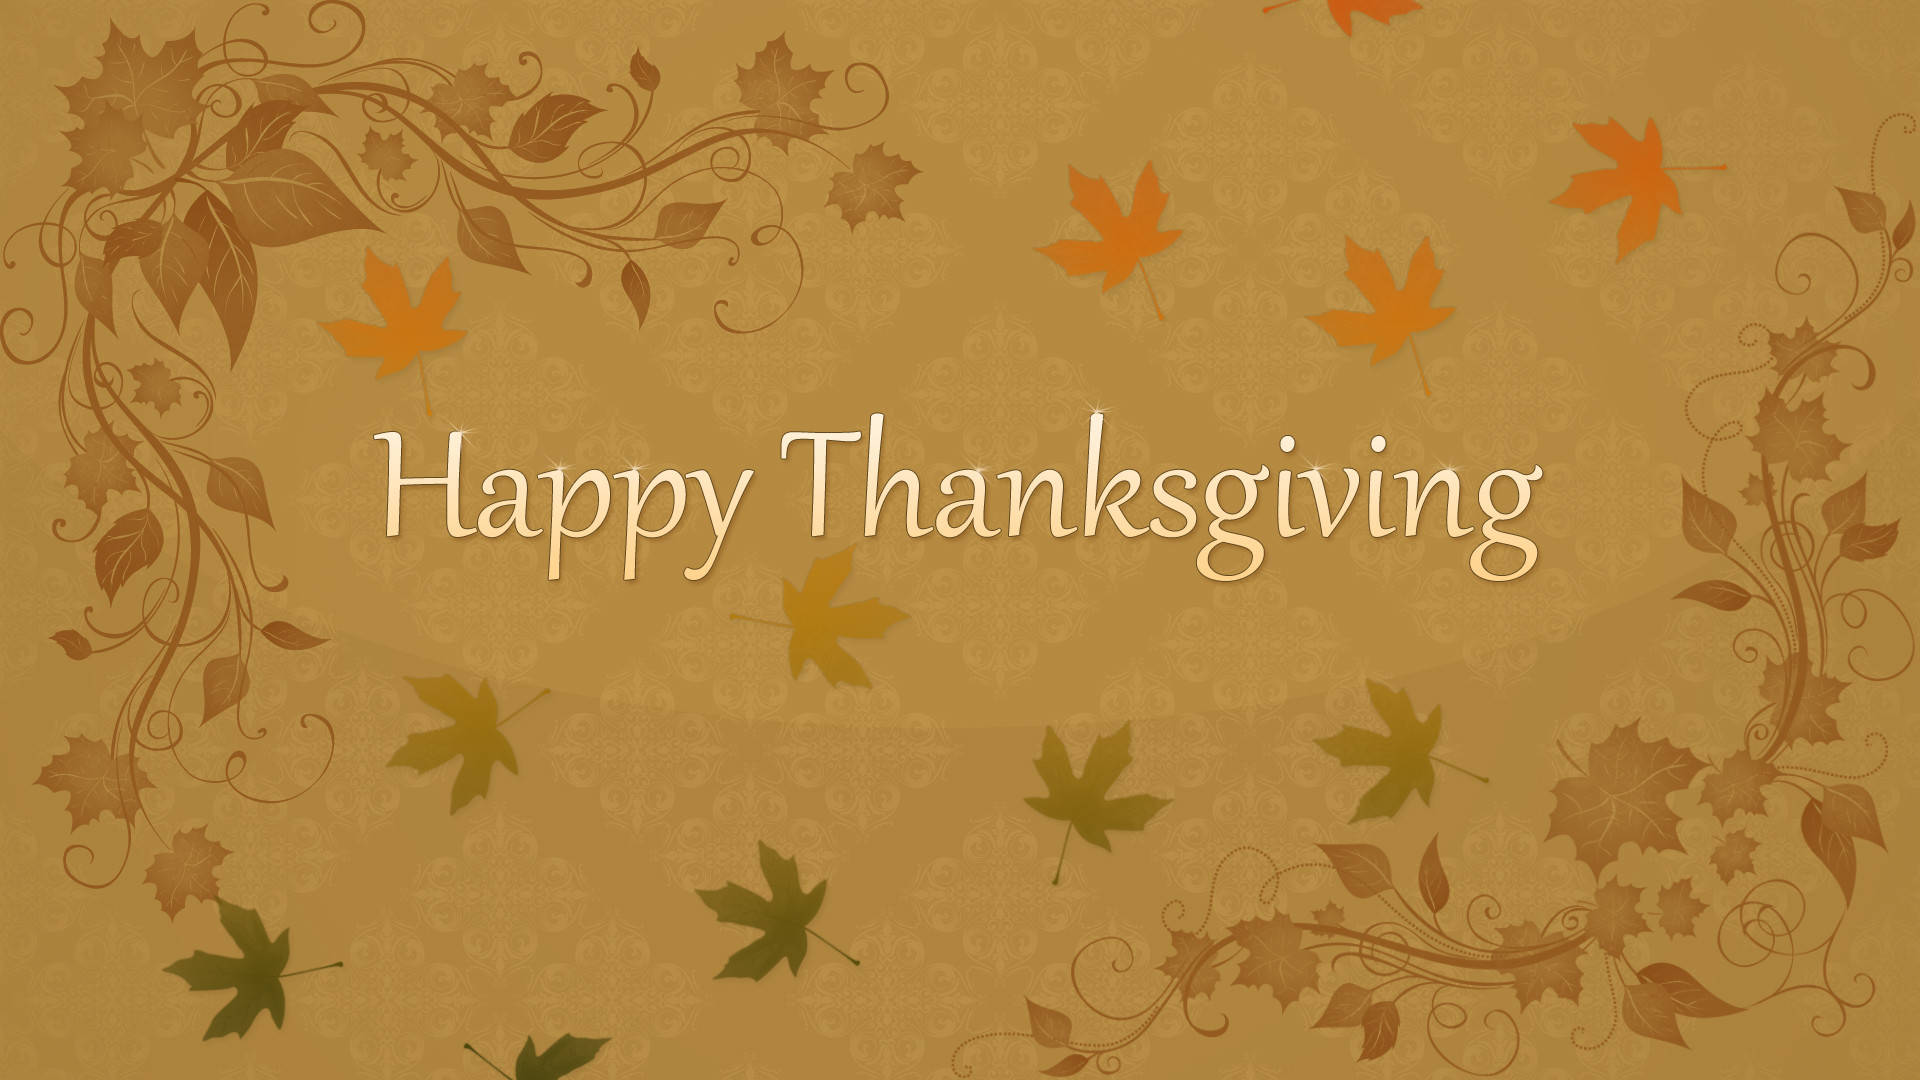 Happy Thanksgiving Day Message Wallpaper